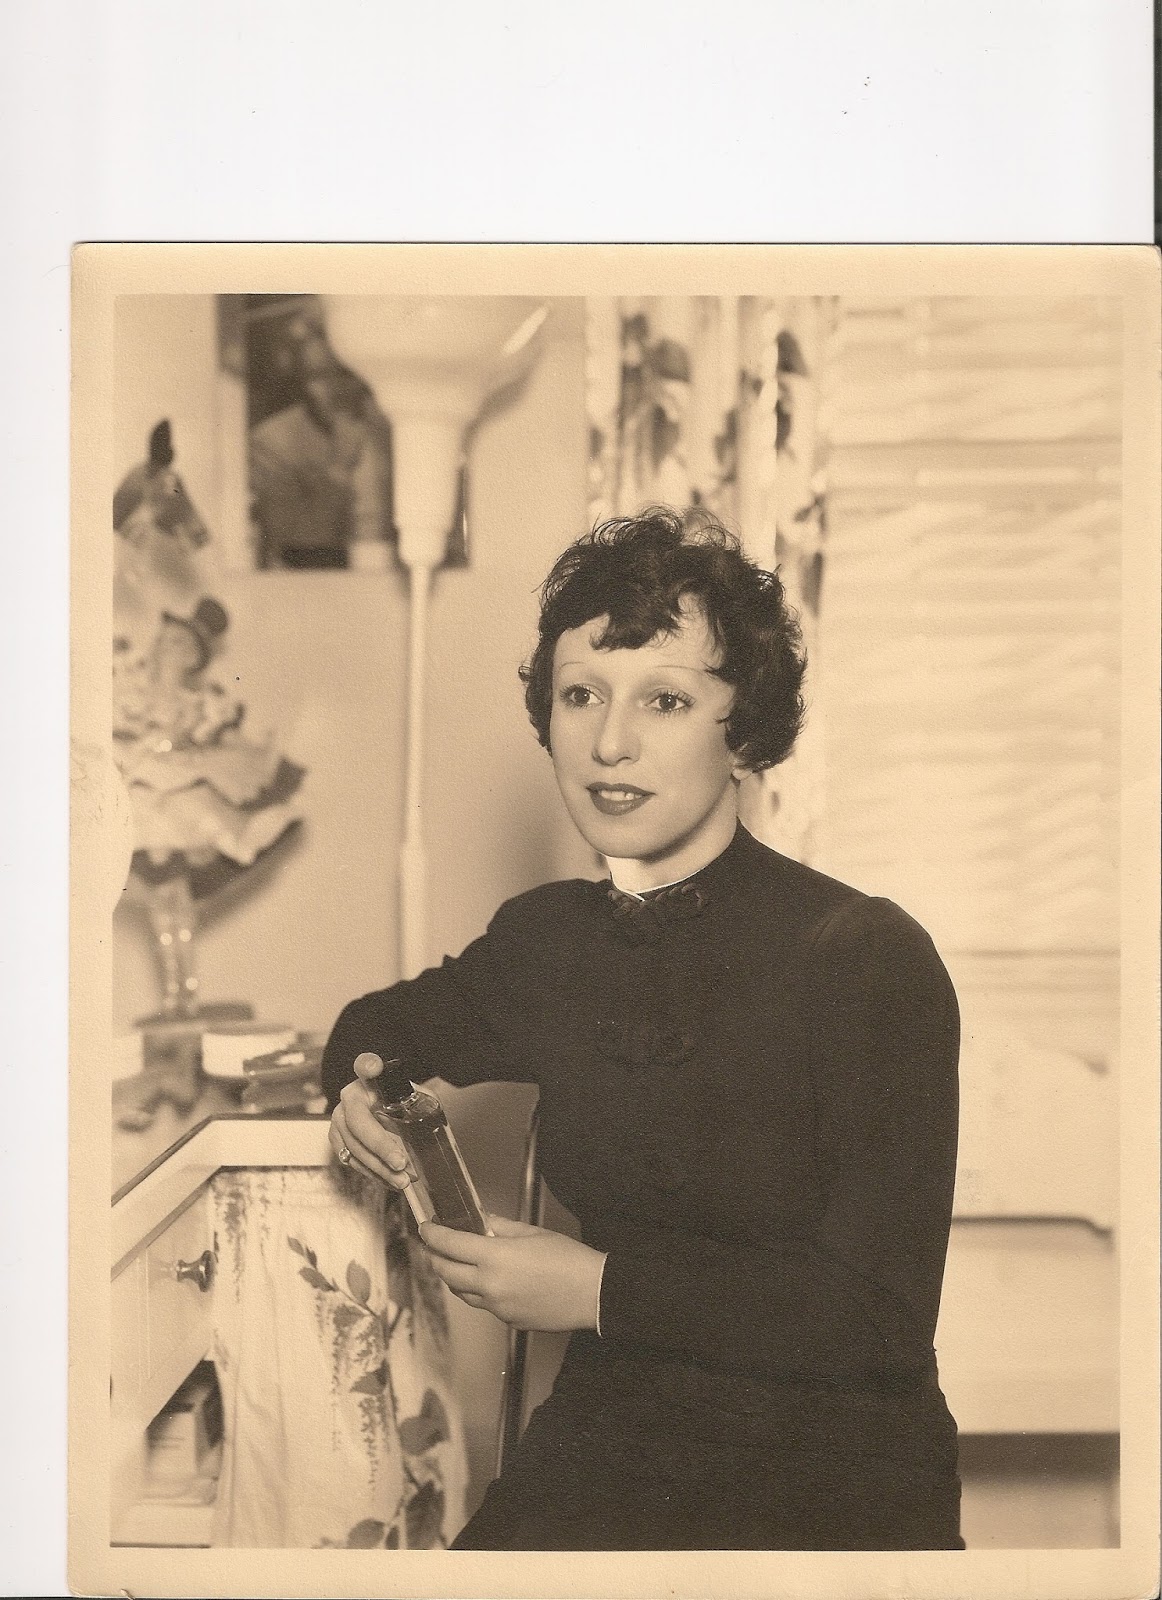 Dottie Ponedel –A pioneer with a brush! photo